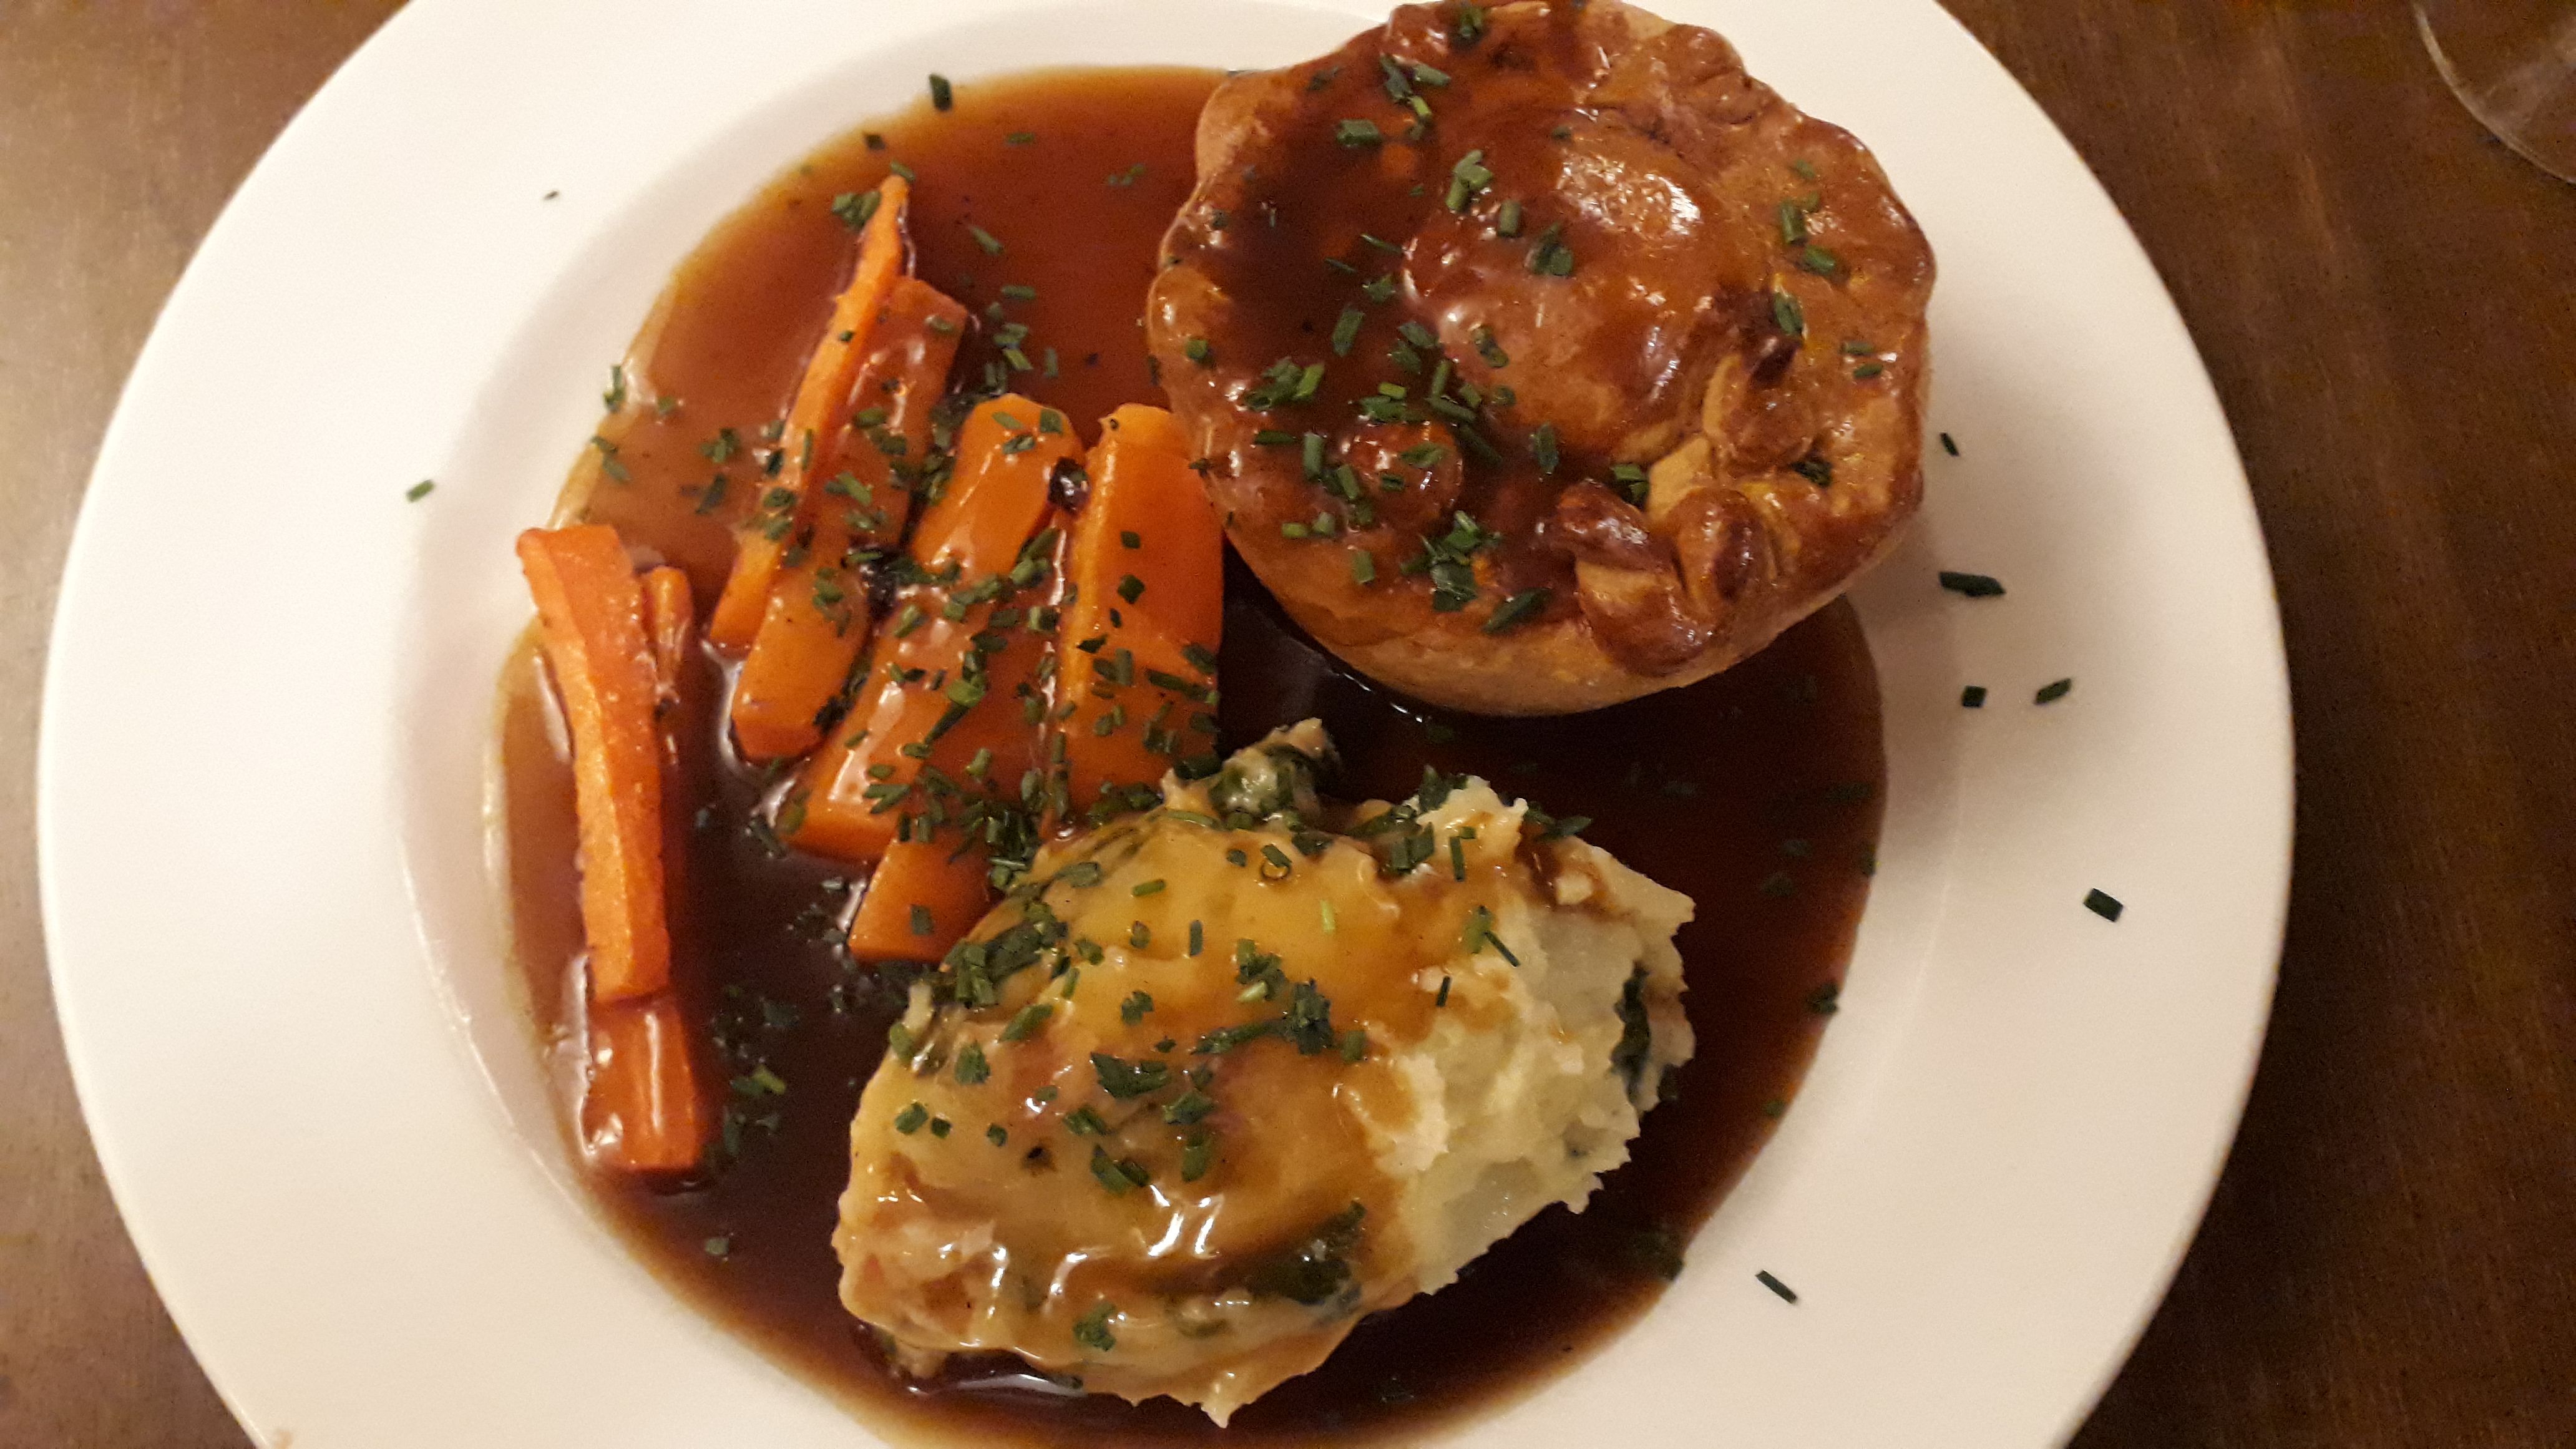 Beef and ale pie with cheddar mash